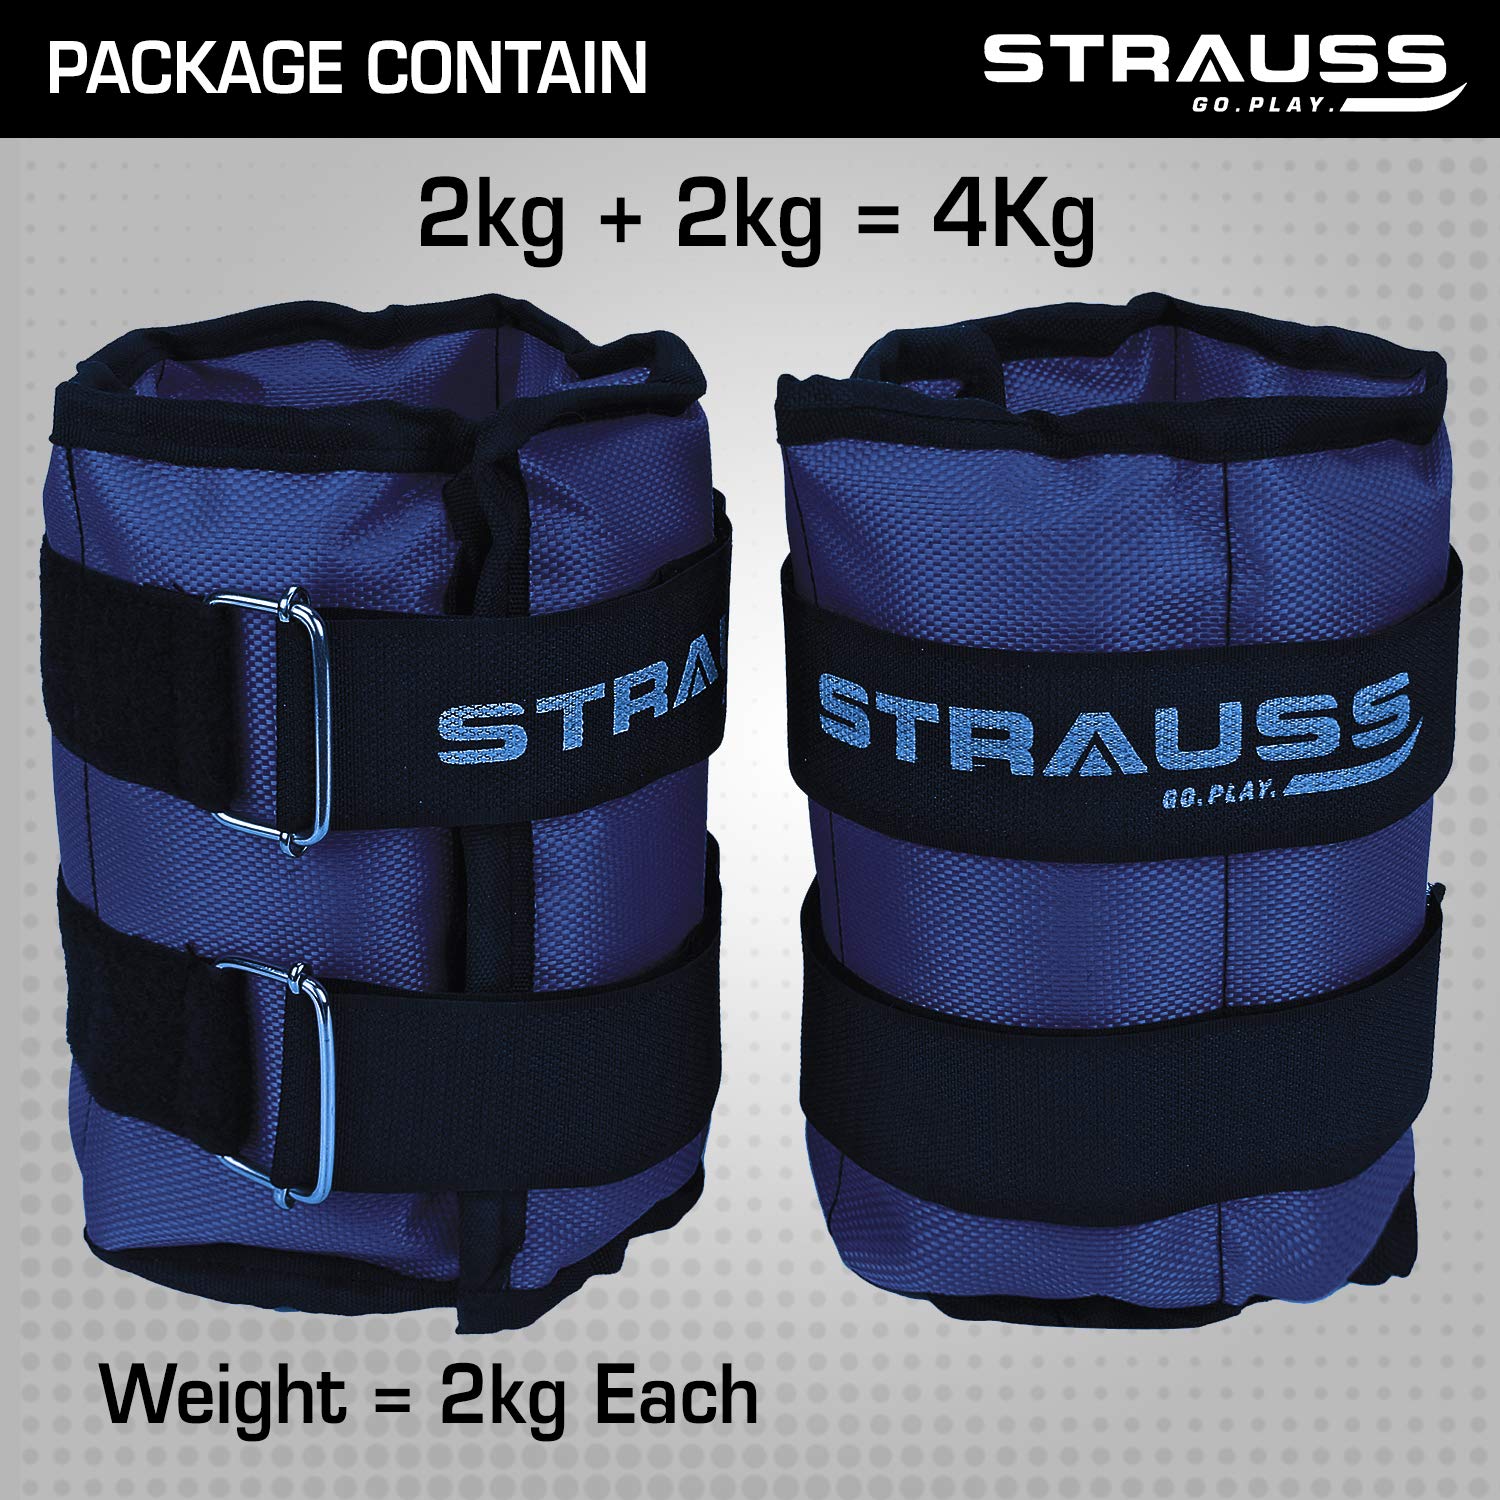 Strauss Adjustable Ankle/Wrist Weights 2 KG X 2 | Ideal for Walking, Running, Jogging, Cycling, Gym, Workout & Strength Training | Easy to Use on Ankle, Wrist, Leg, (Blue)